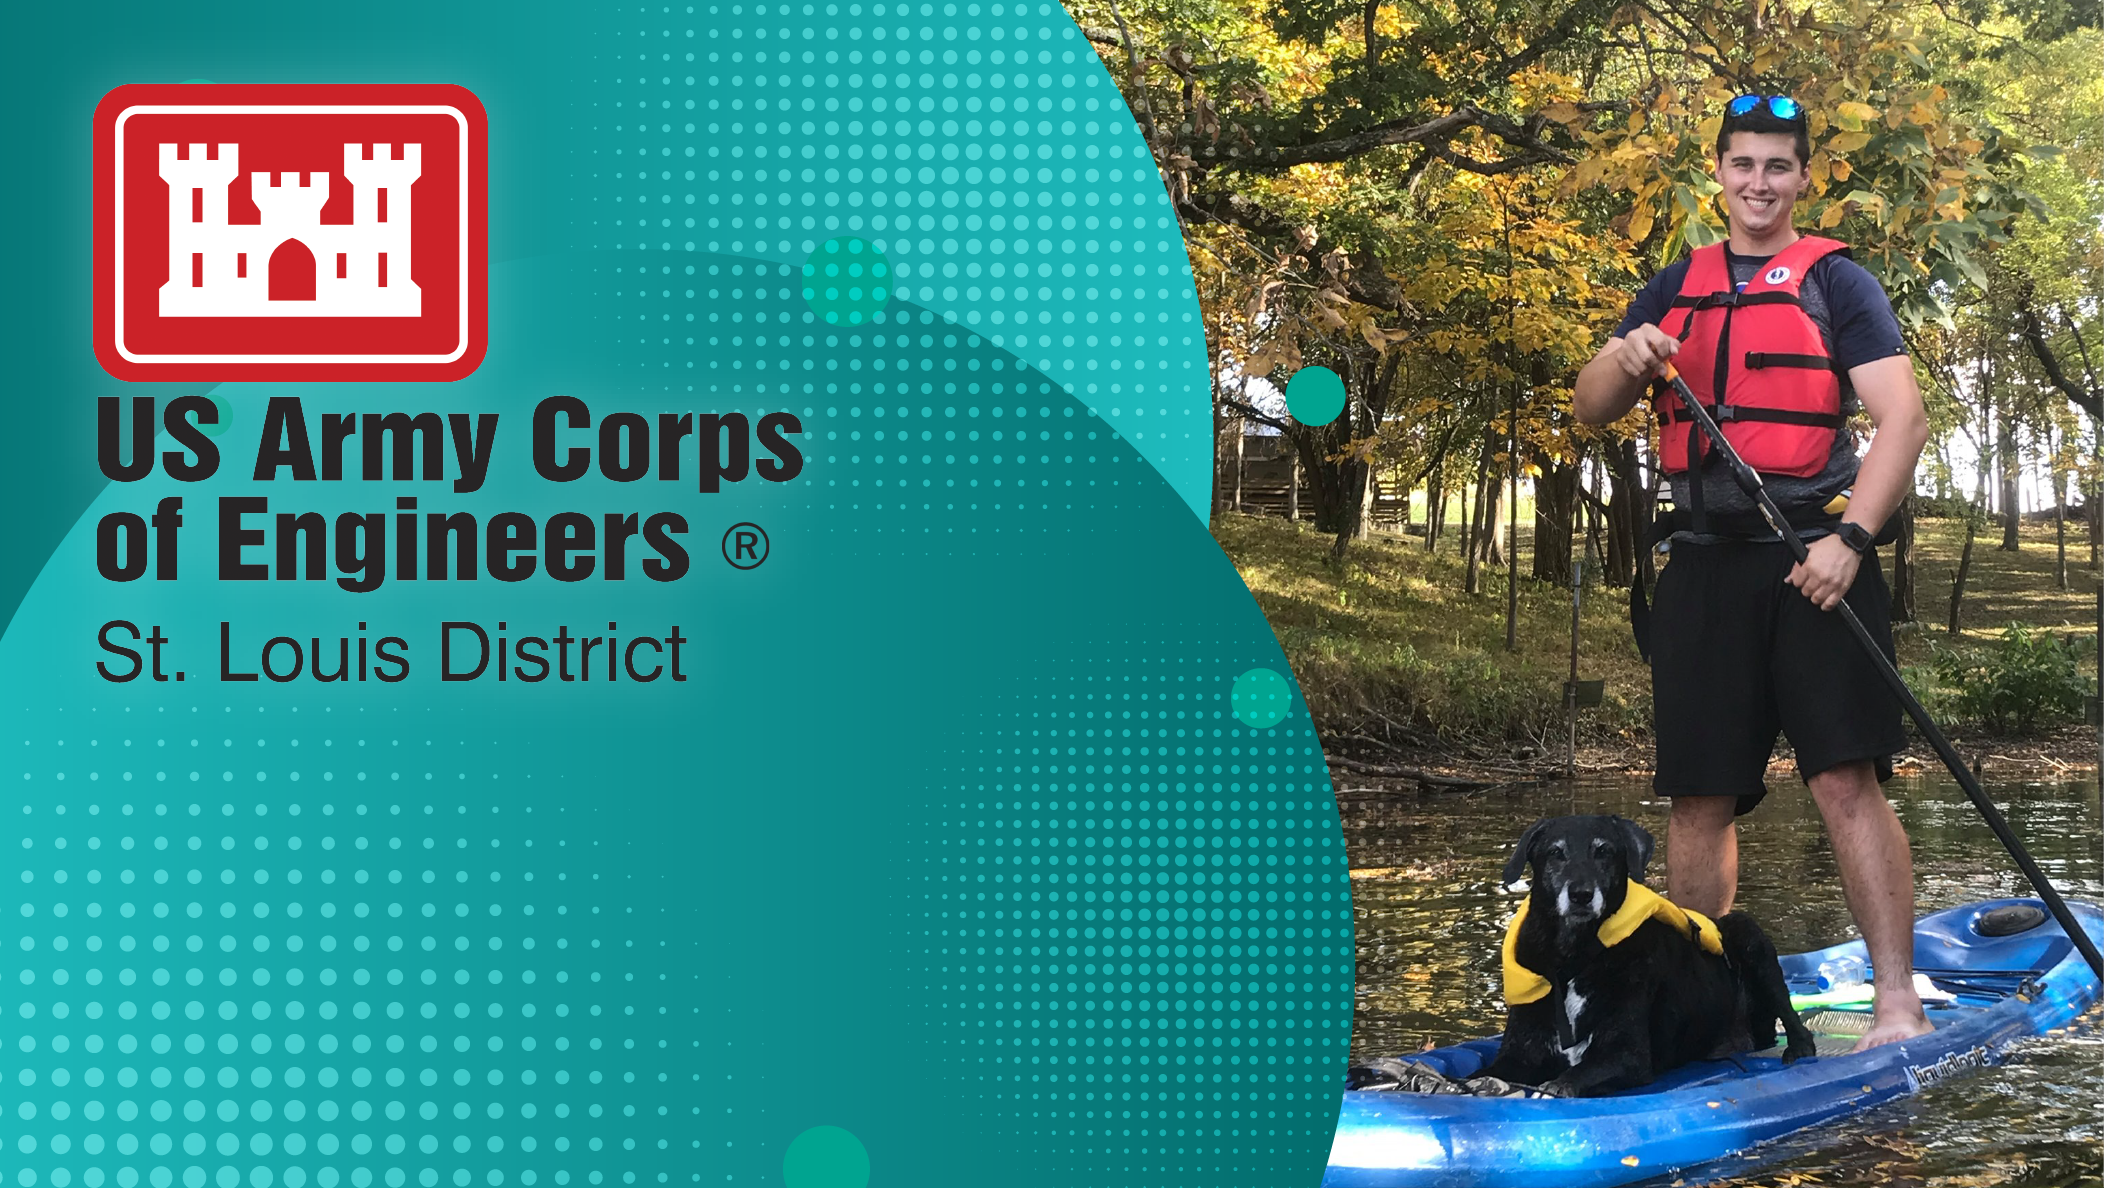 Learn essential water safety skills to keep you safe, provided to you by the US Army Corps of Engineers St. Louis District